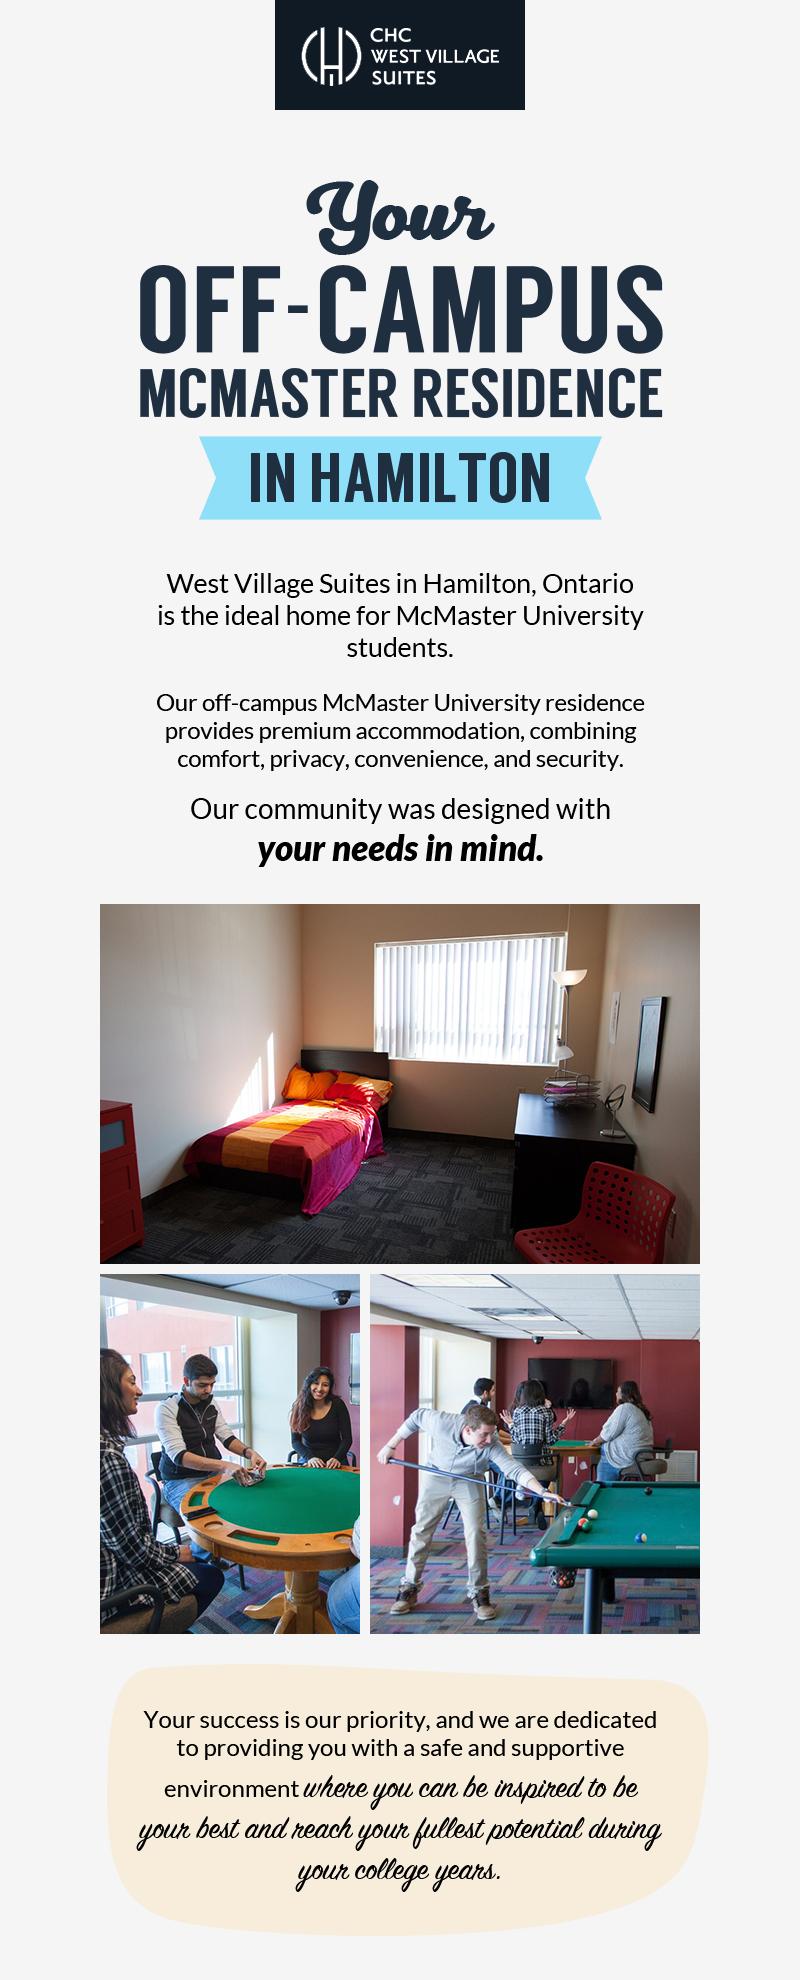 West Village Suites - Premium Residence for McMaster Students